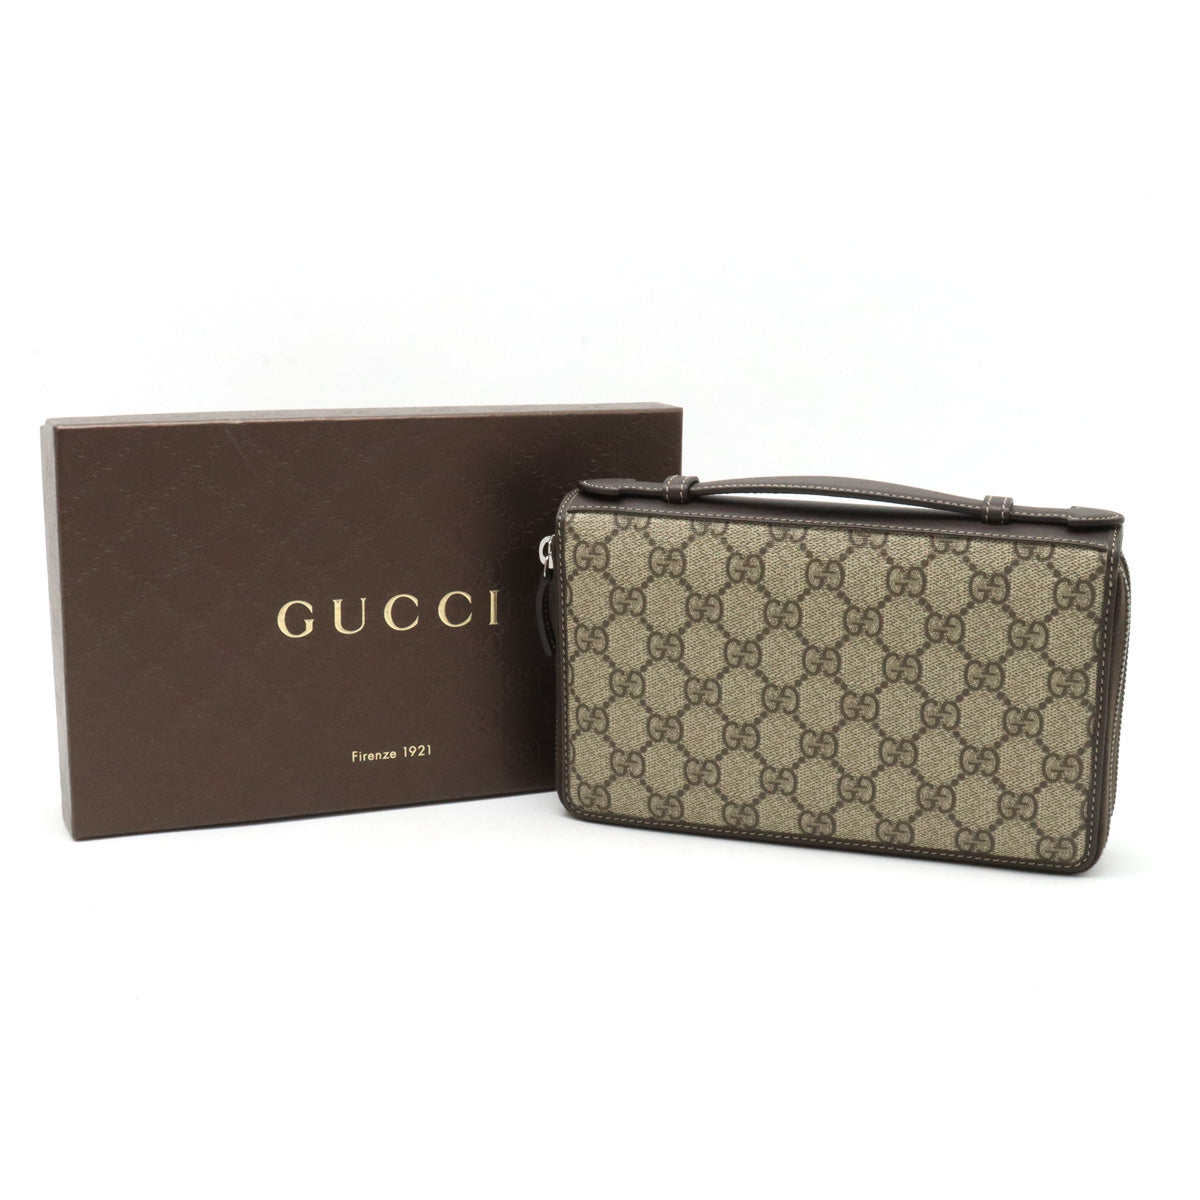 GUCCI Gucci GG Sprime Documentary Case Second Bag  Round Fassner Long Wallet PVC Leather Beige Dark Brown 336298  Egg Blumen/Mosaic Quality